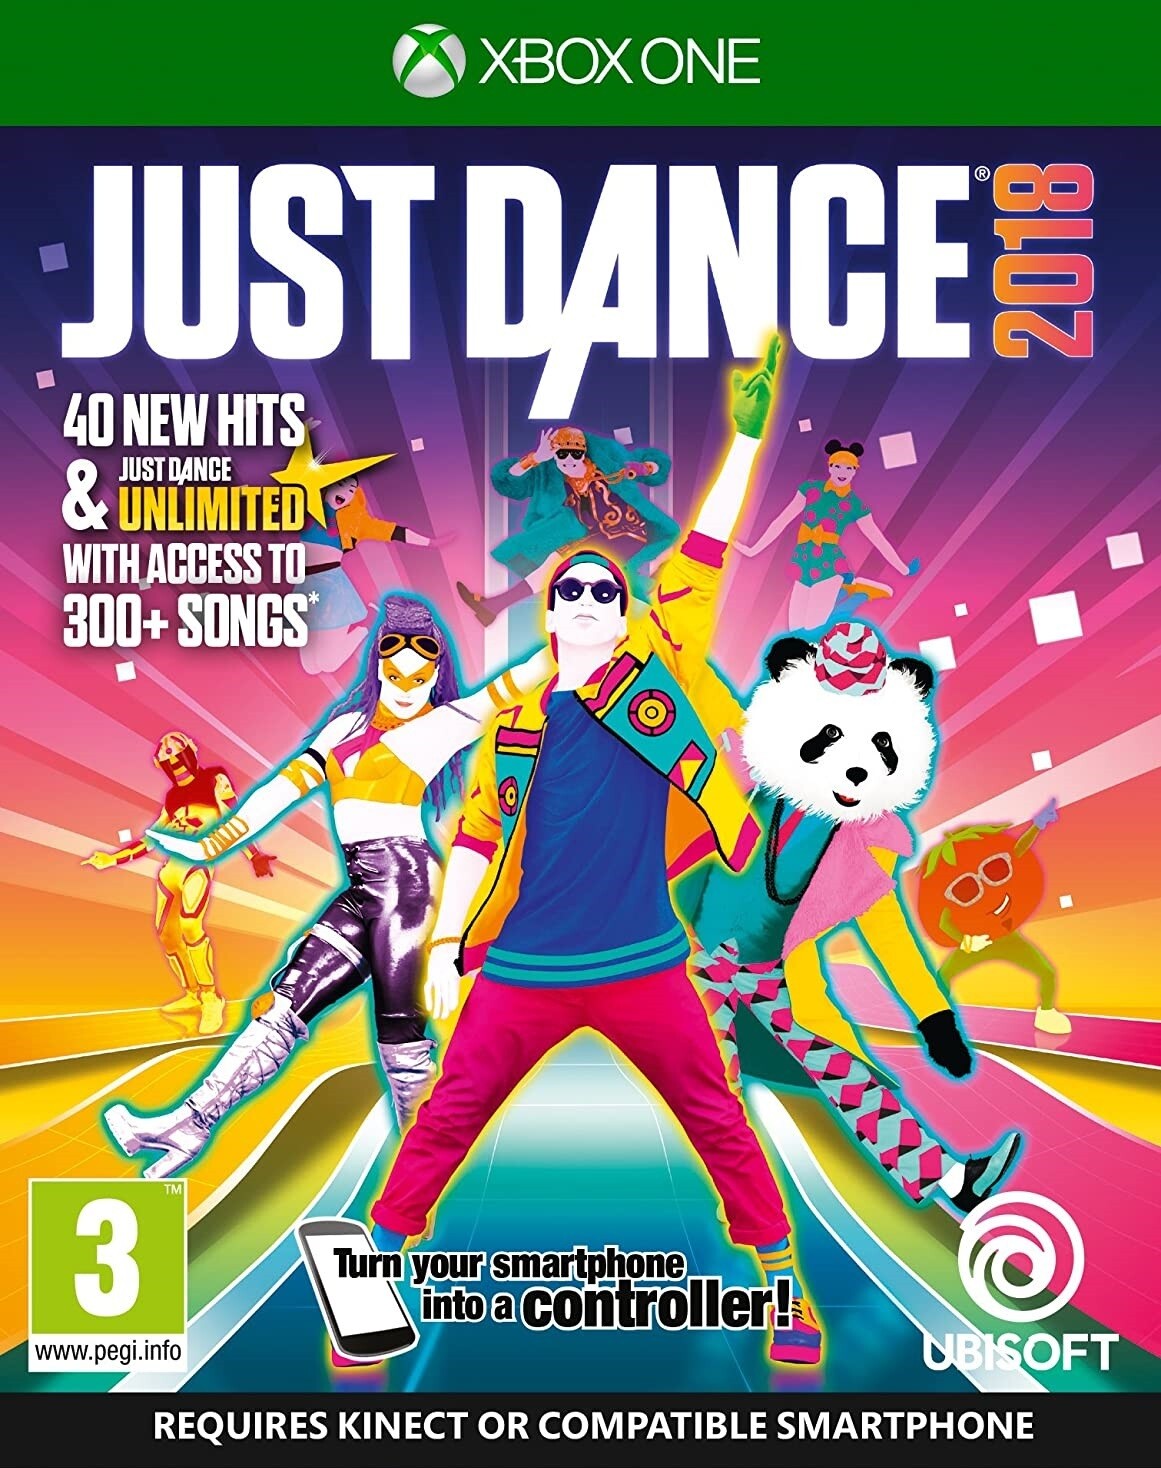 Just Dance 2018 |Xbox ONE Kinect|